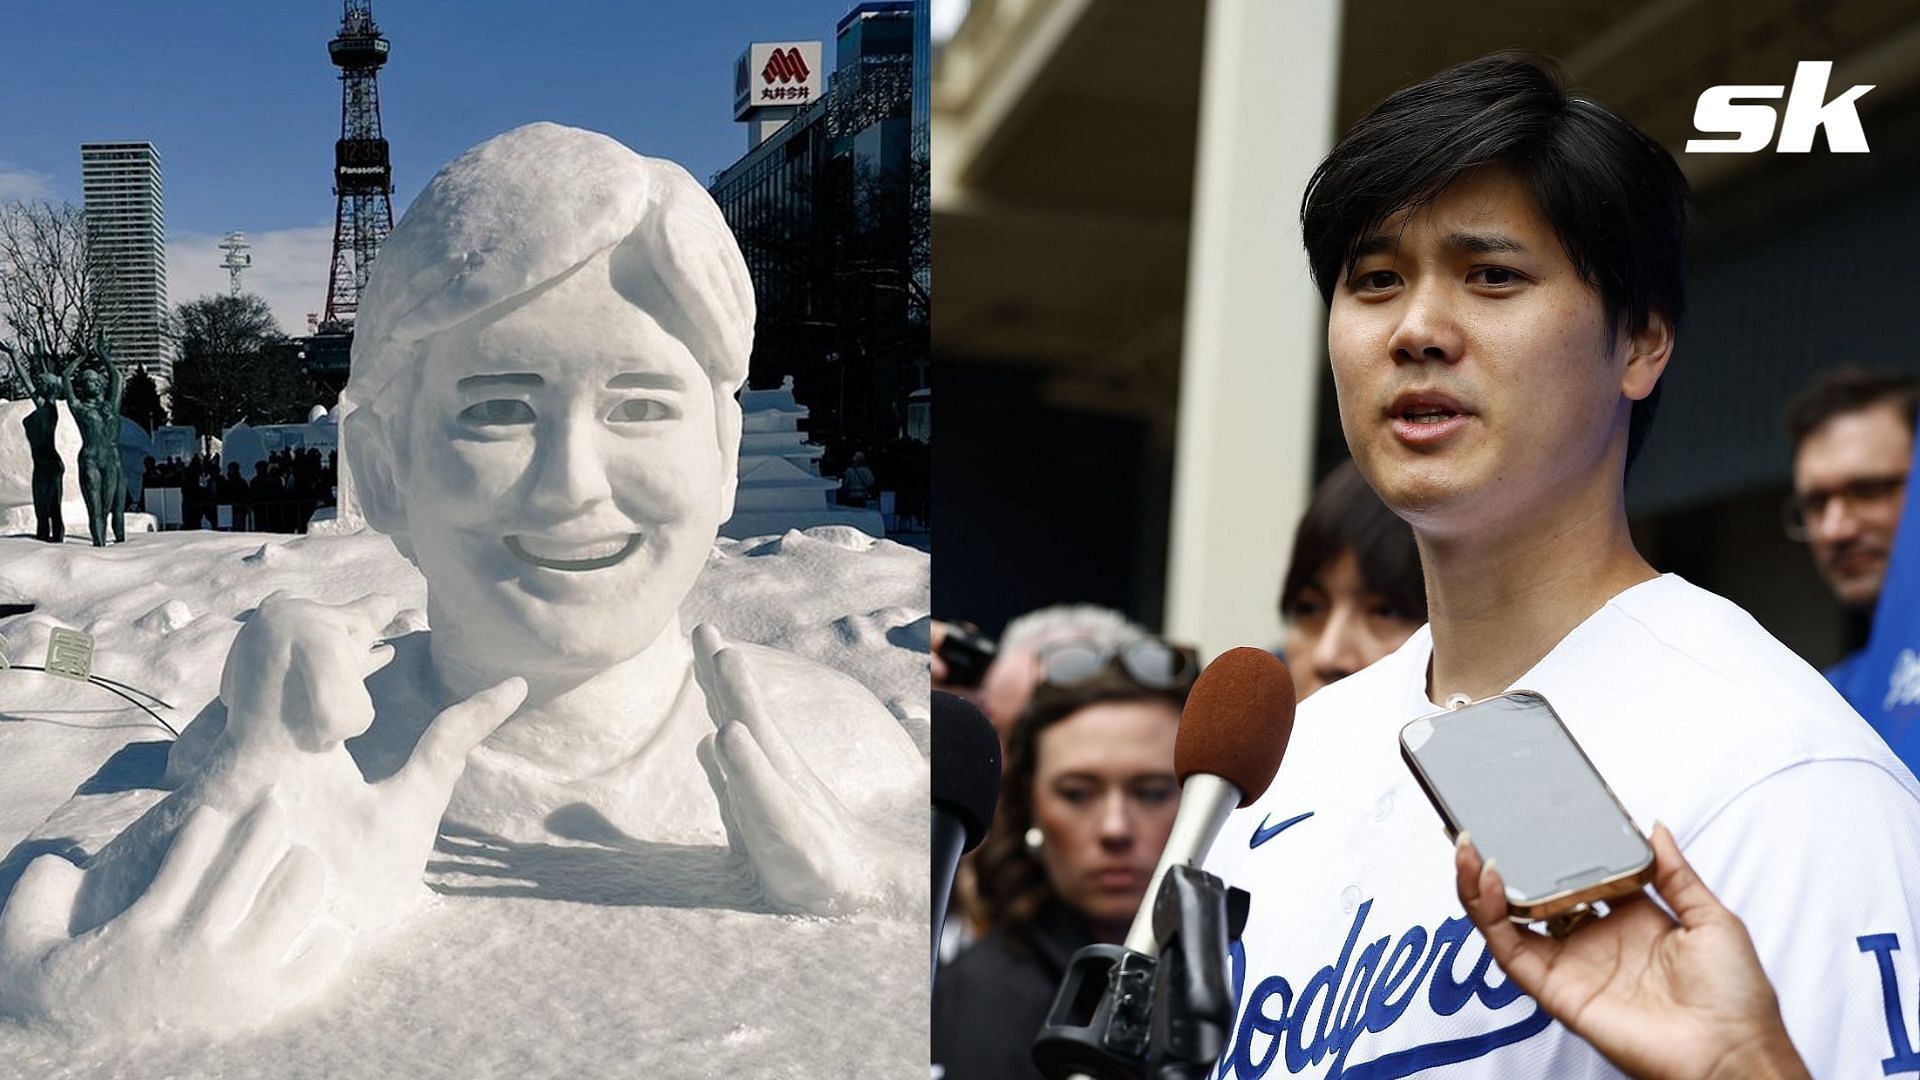 A photo of a snow sculpture of Shohei Ohtani and his dog Decoy has been circulating on social media